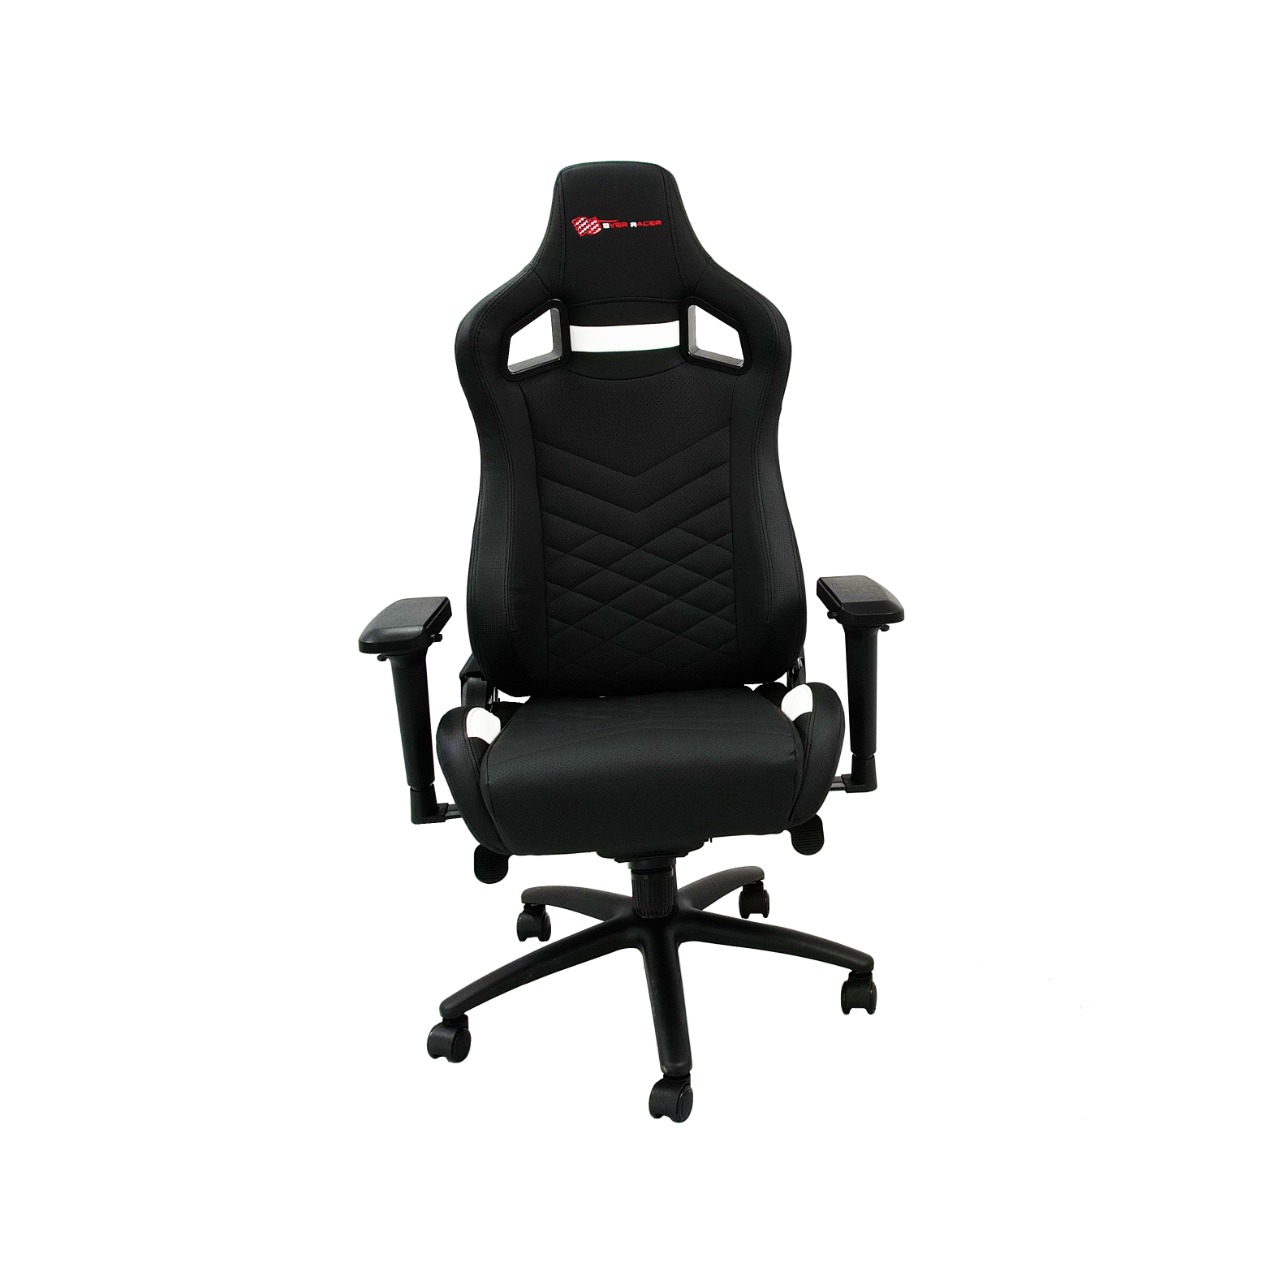 EverRacer Alpha Black and White Gaming Chair